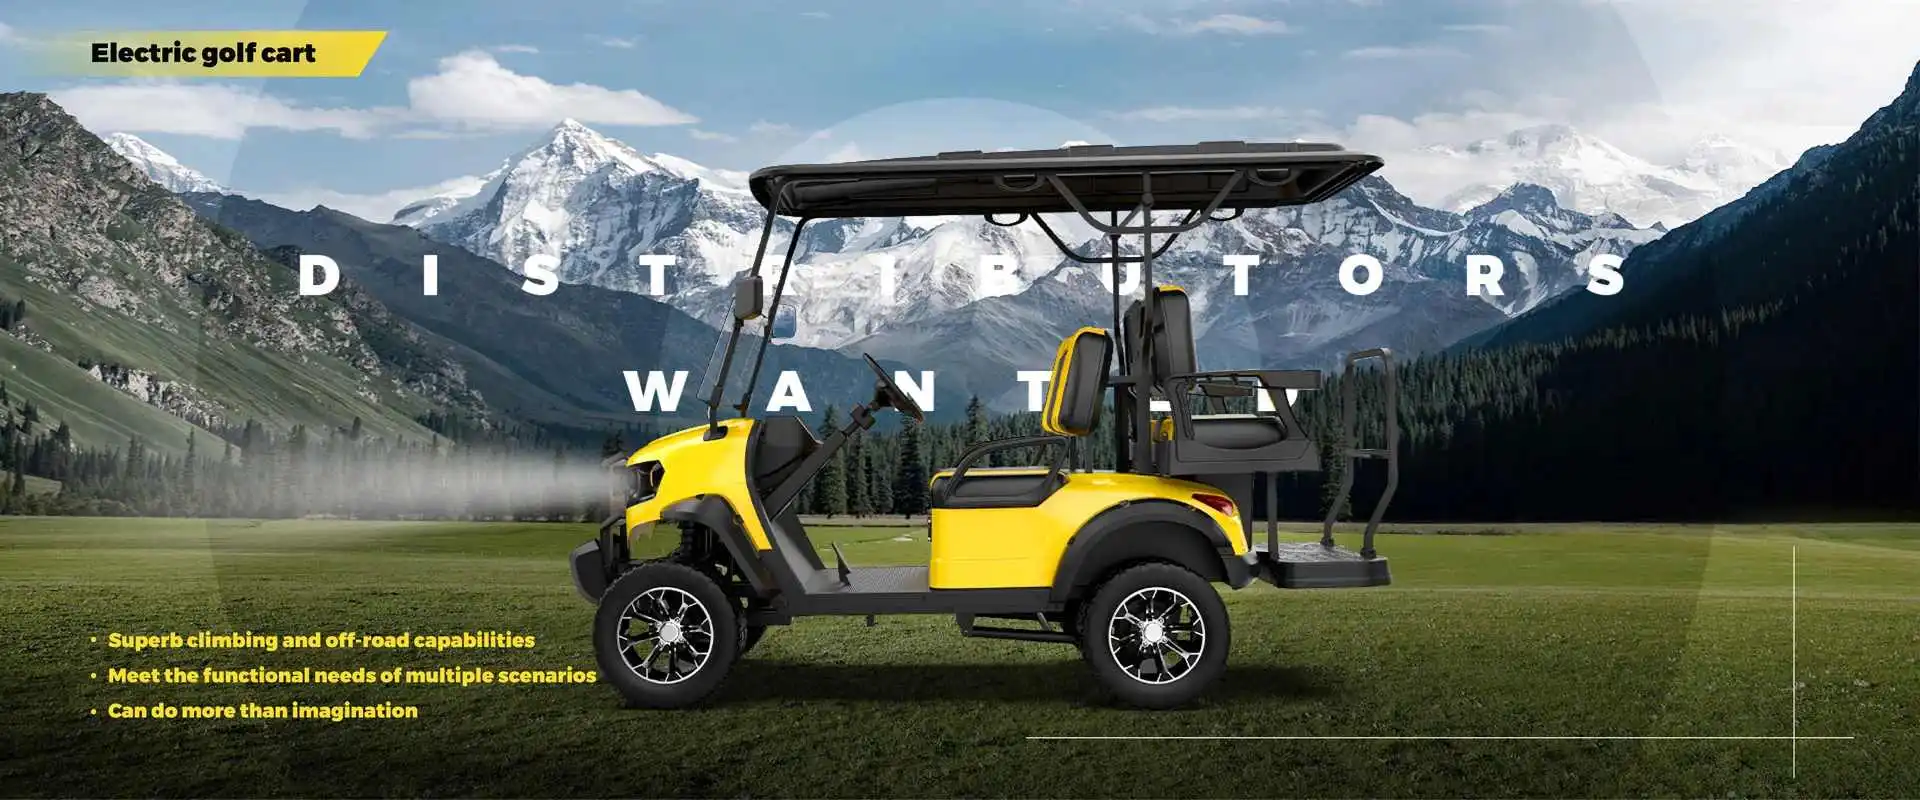 FL 2 2 Seater Electric Lifted Golf Cart